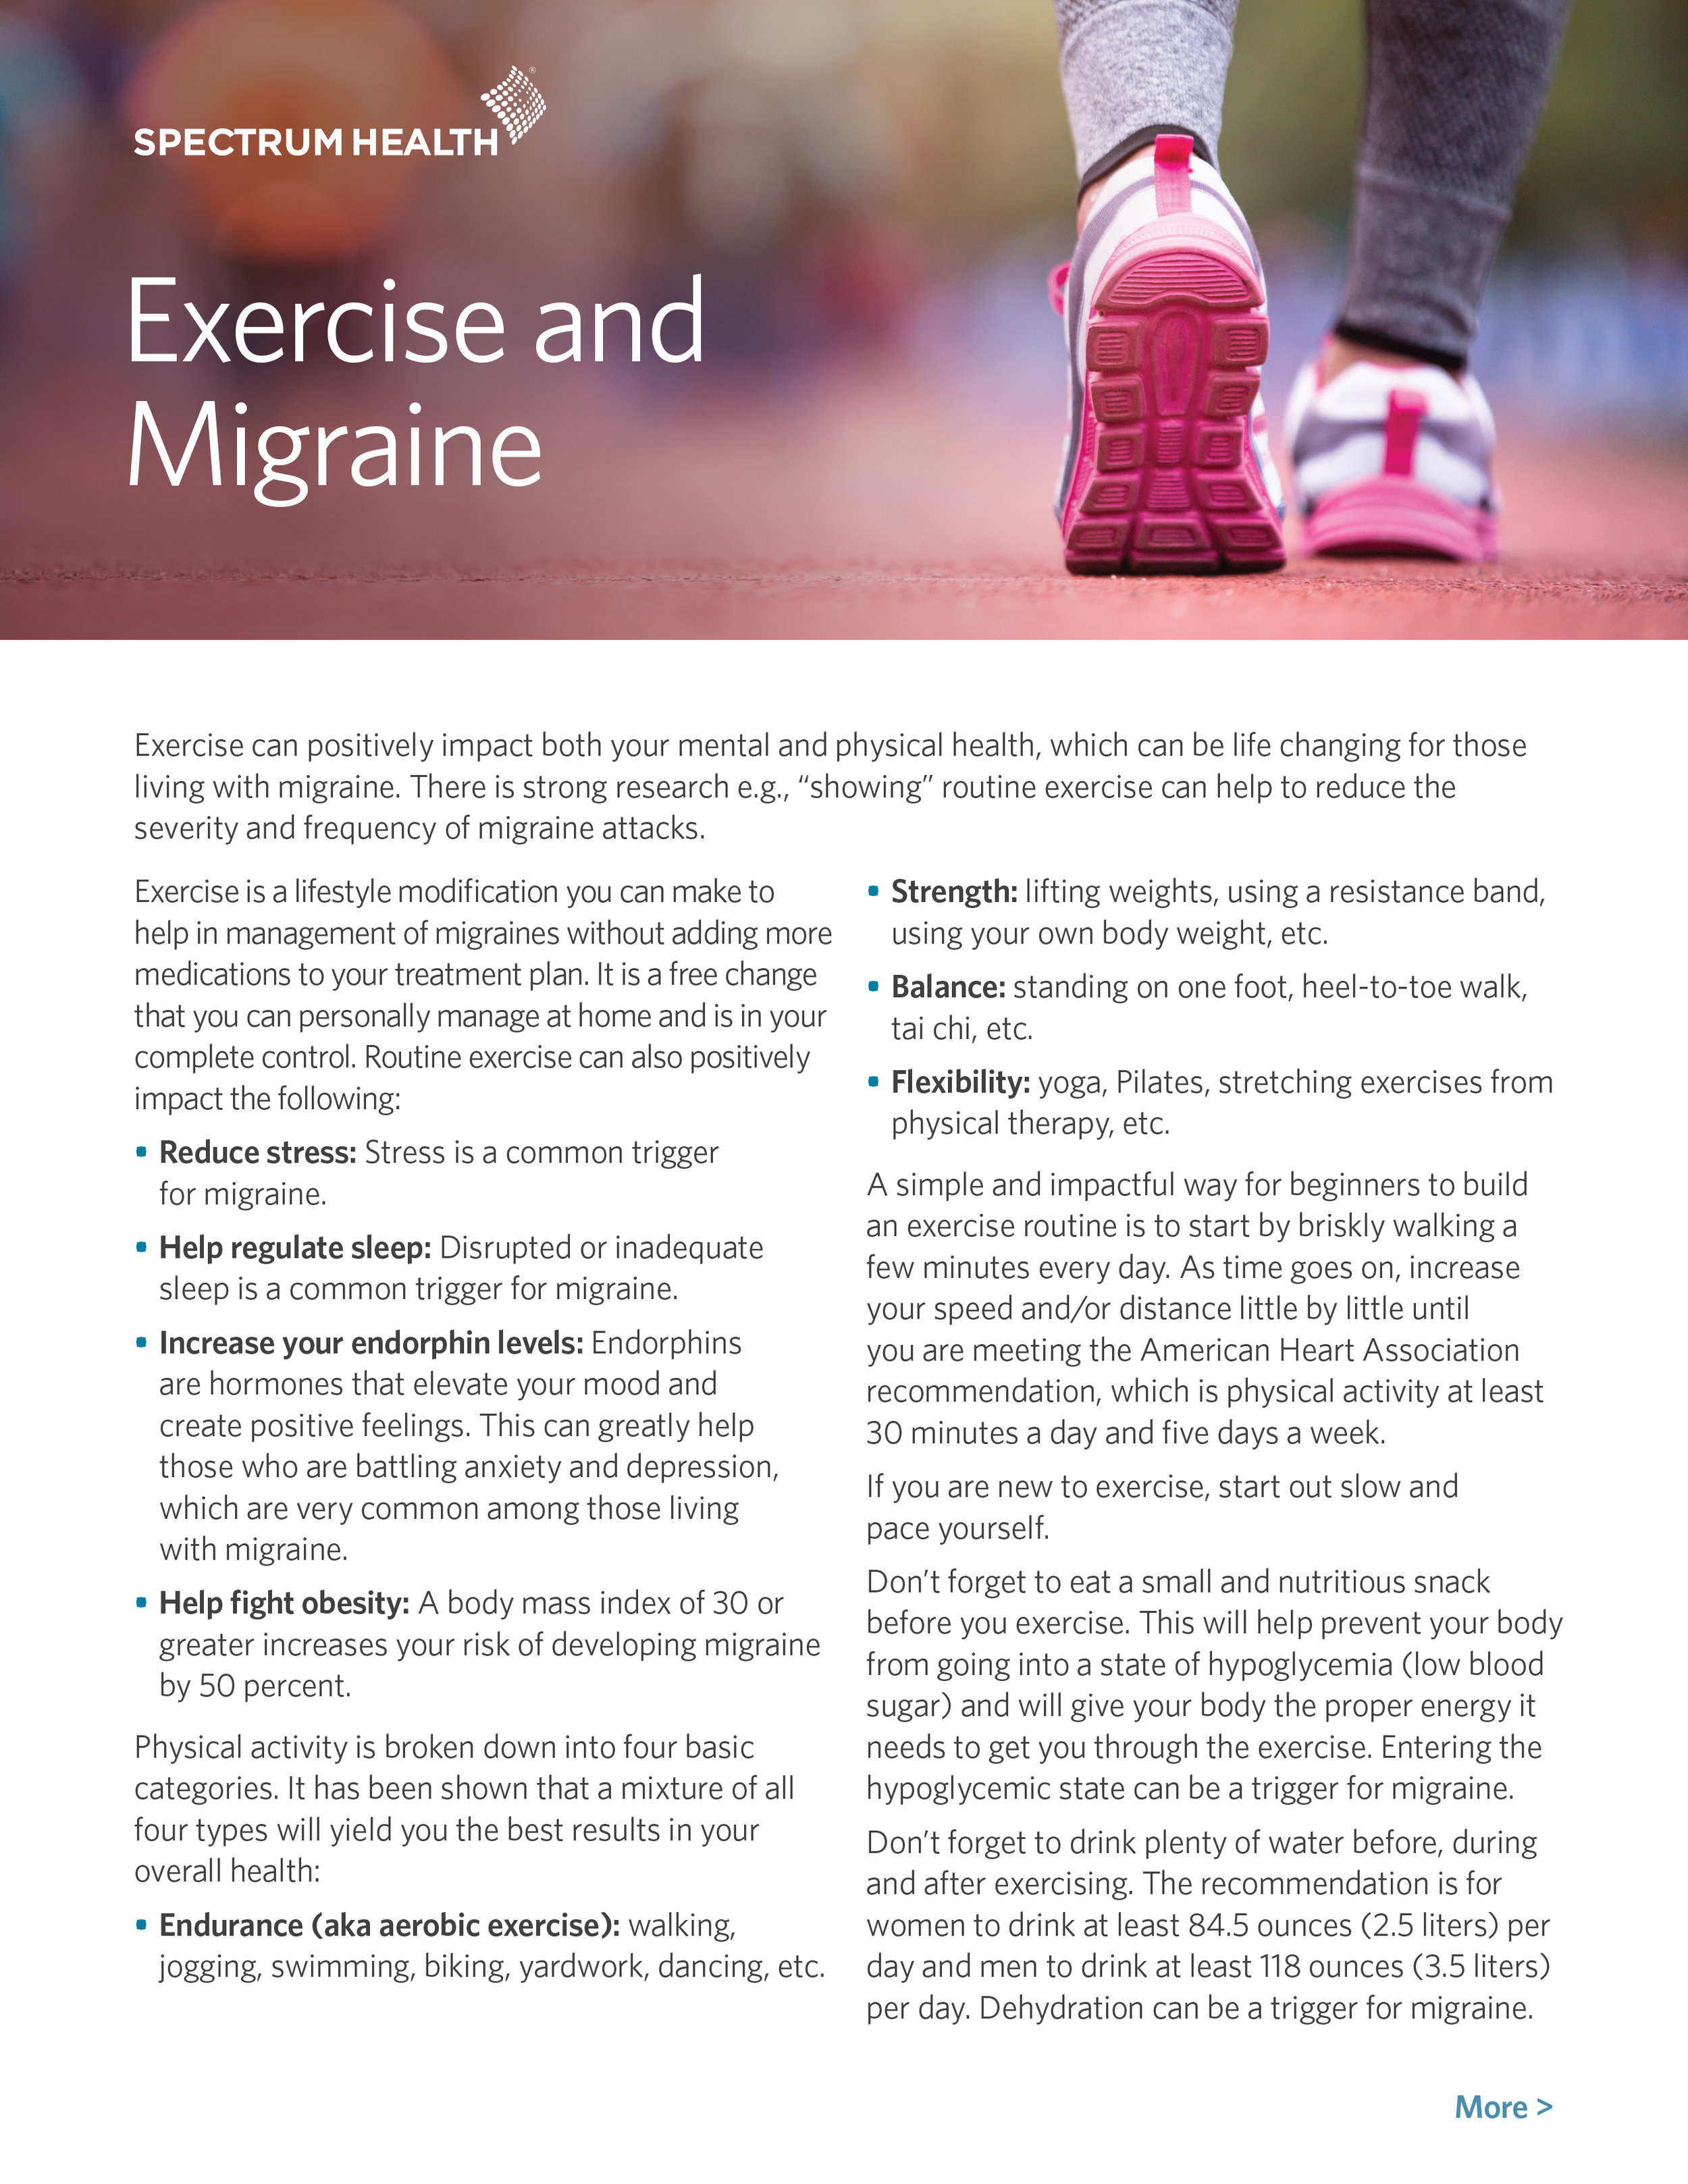 LD1148-4  X22442 - Exercise and Migraine-1.jpg